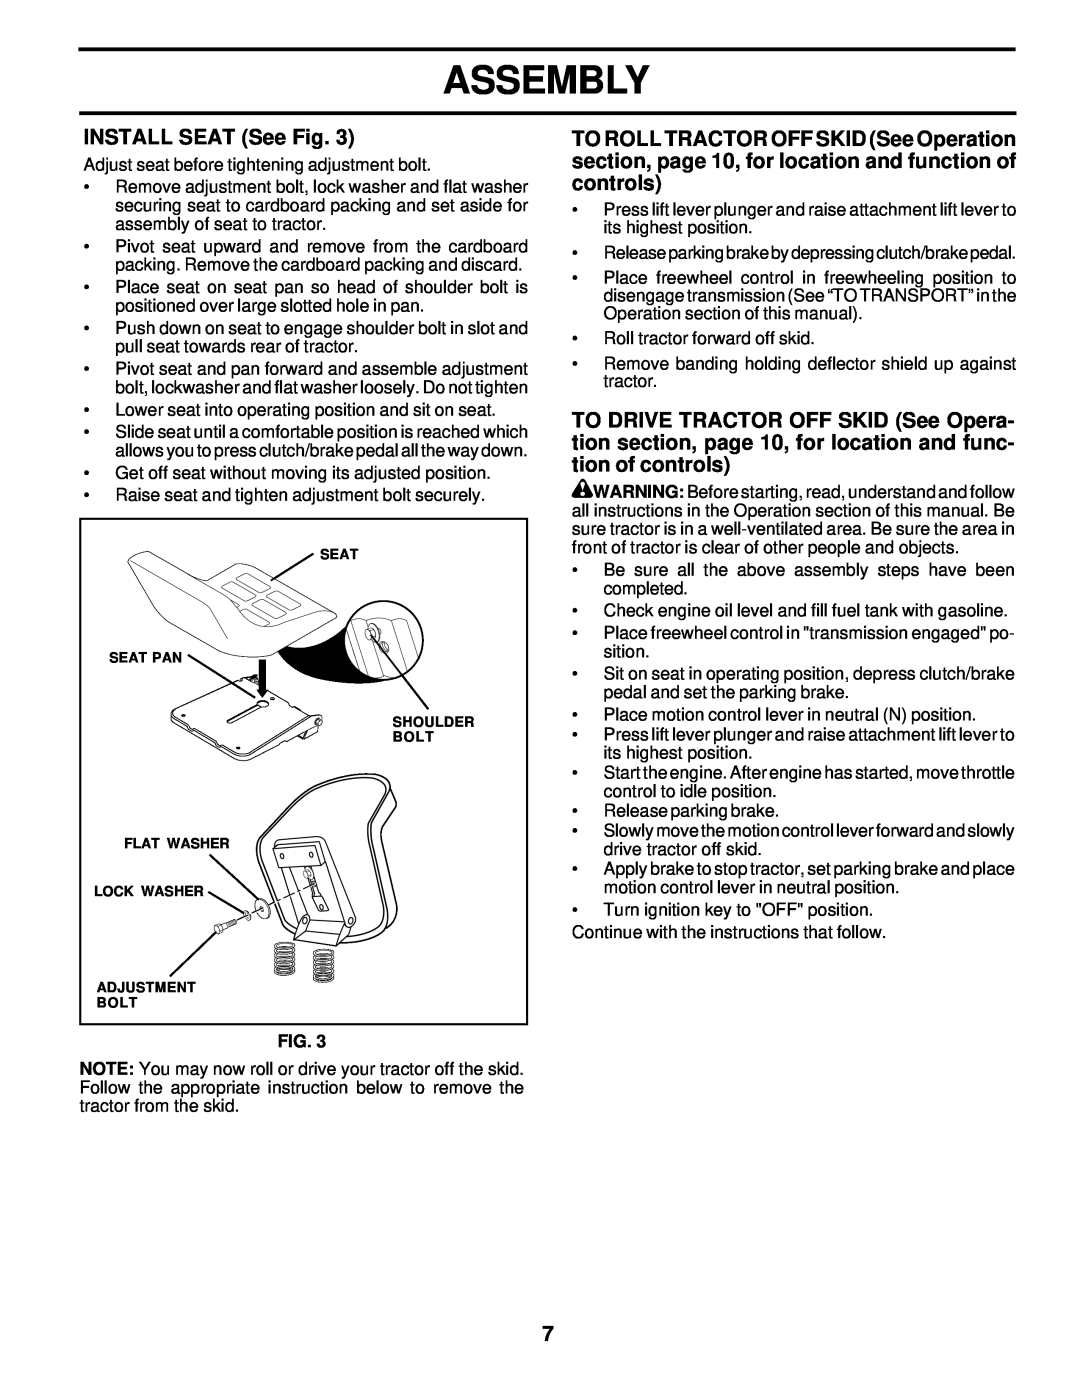 Weed Eater 177019 manual INSTALL SEAT See Fig, Assembly 